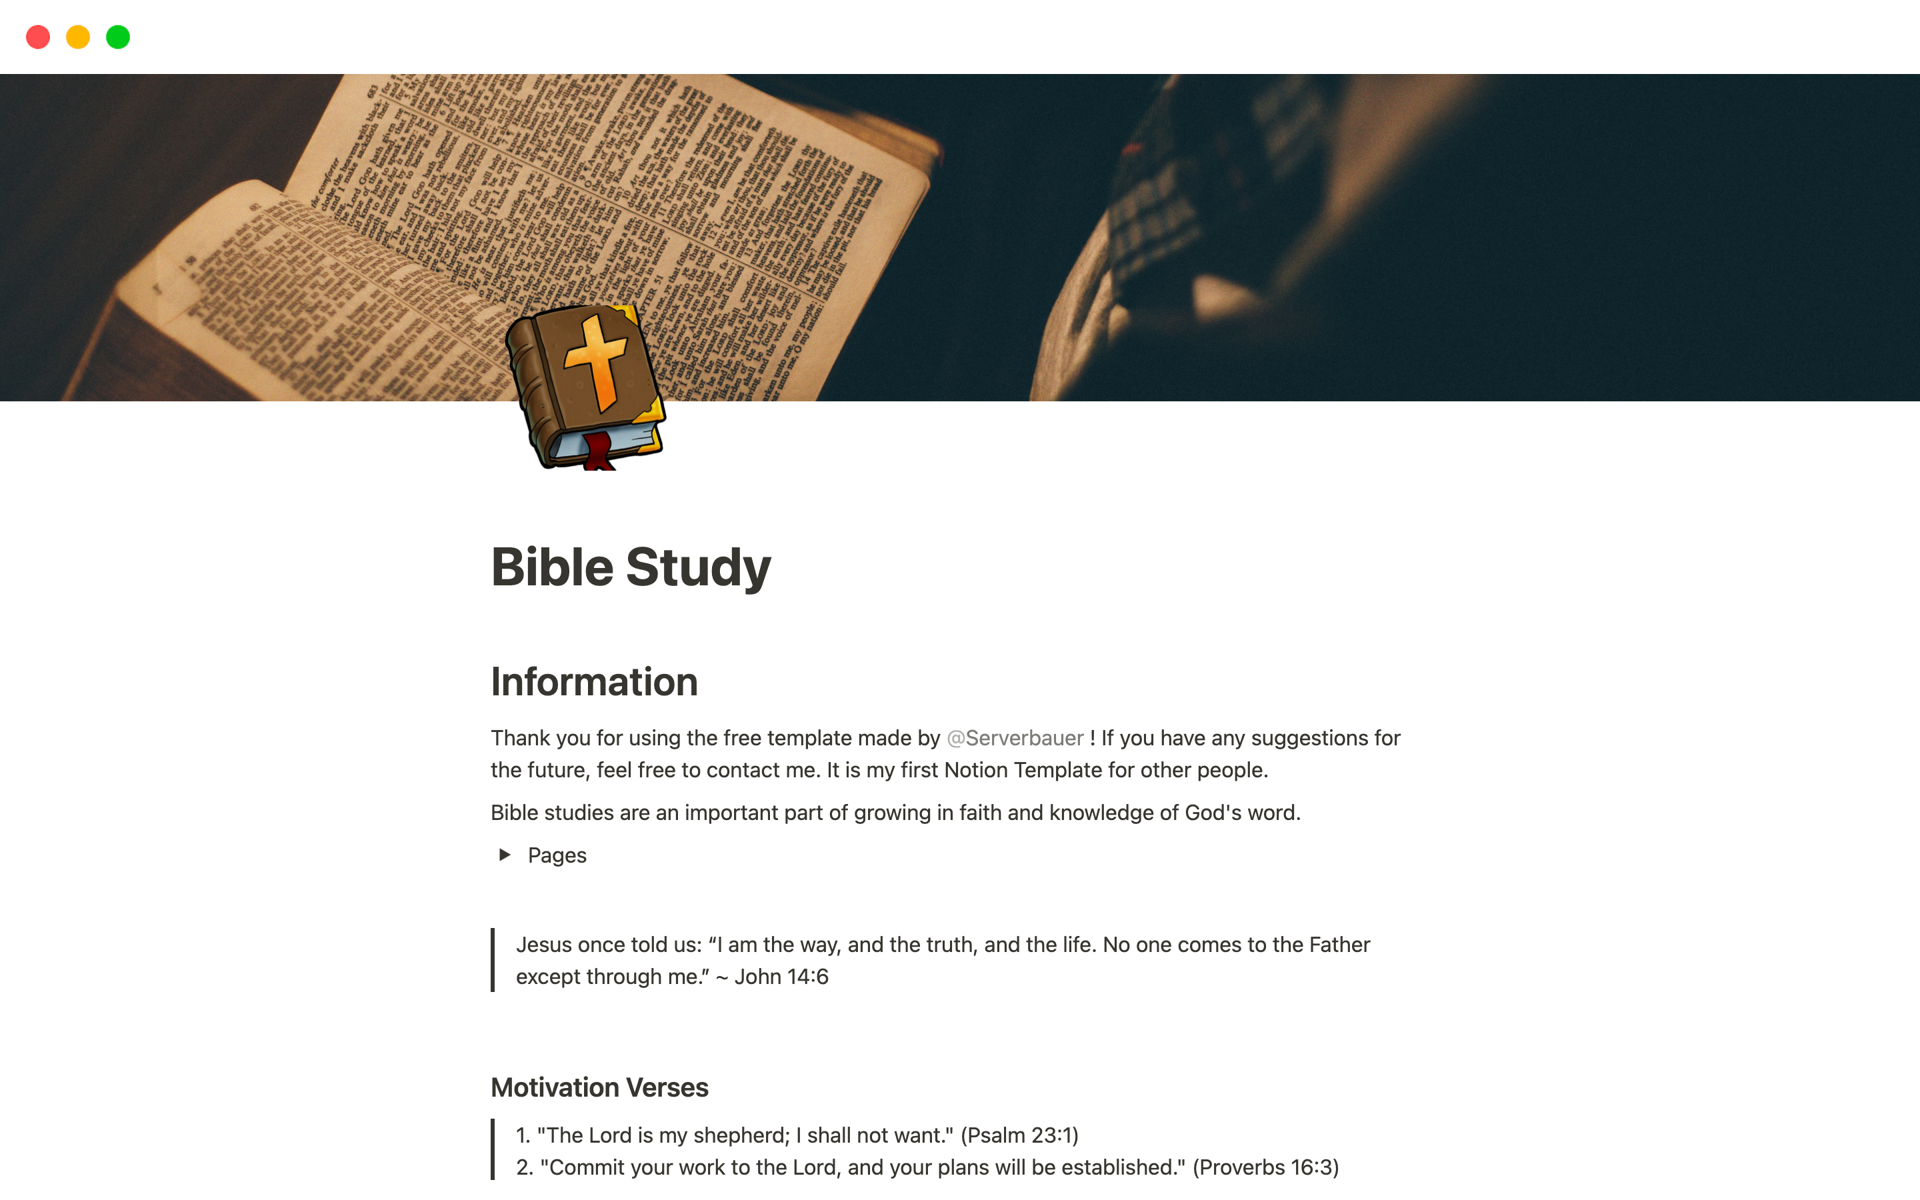 This is a free template for a Christian Bible Study.